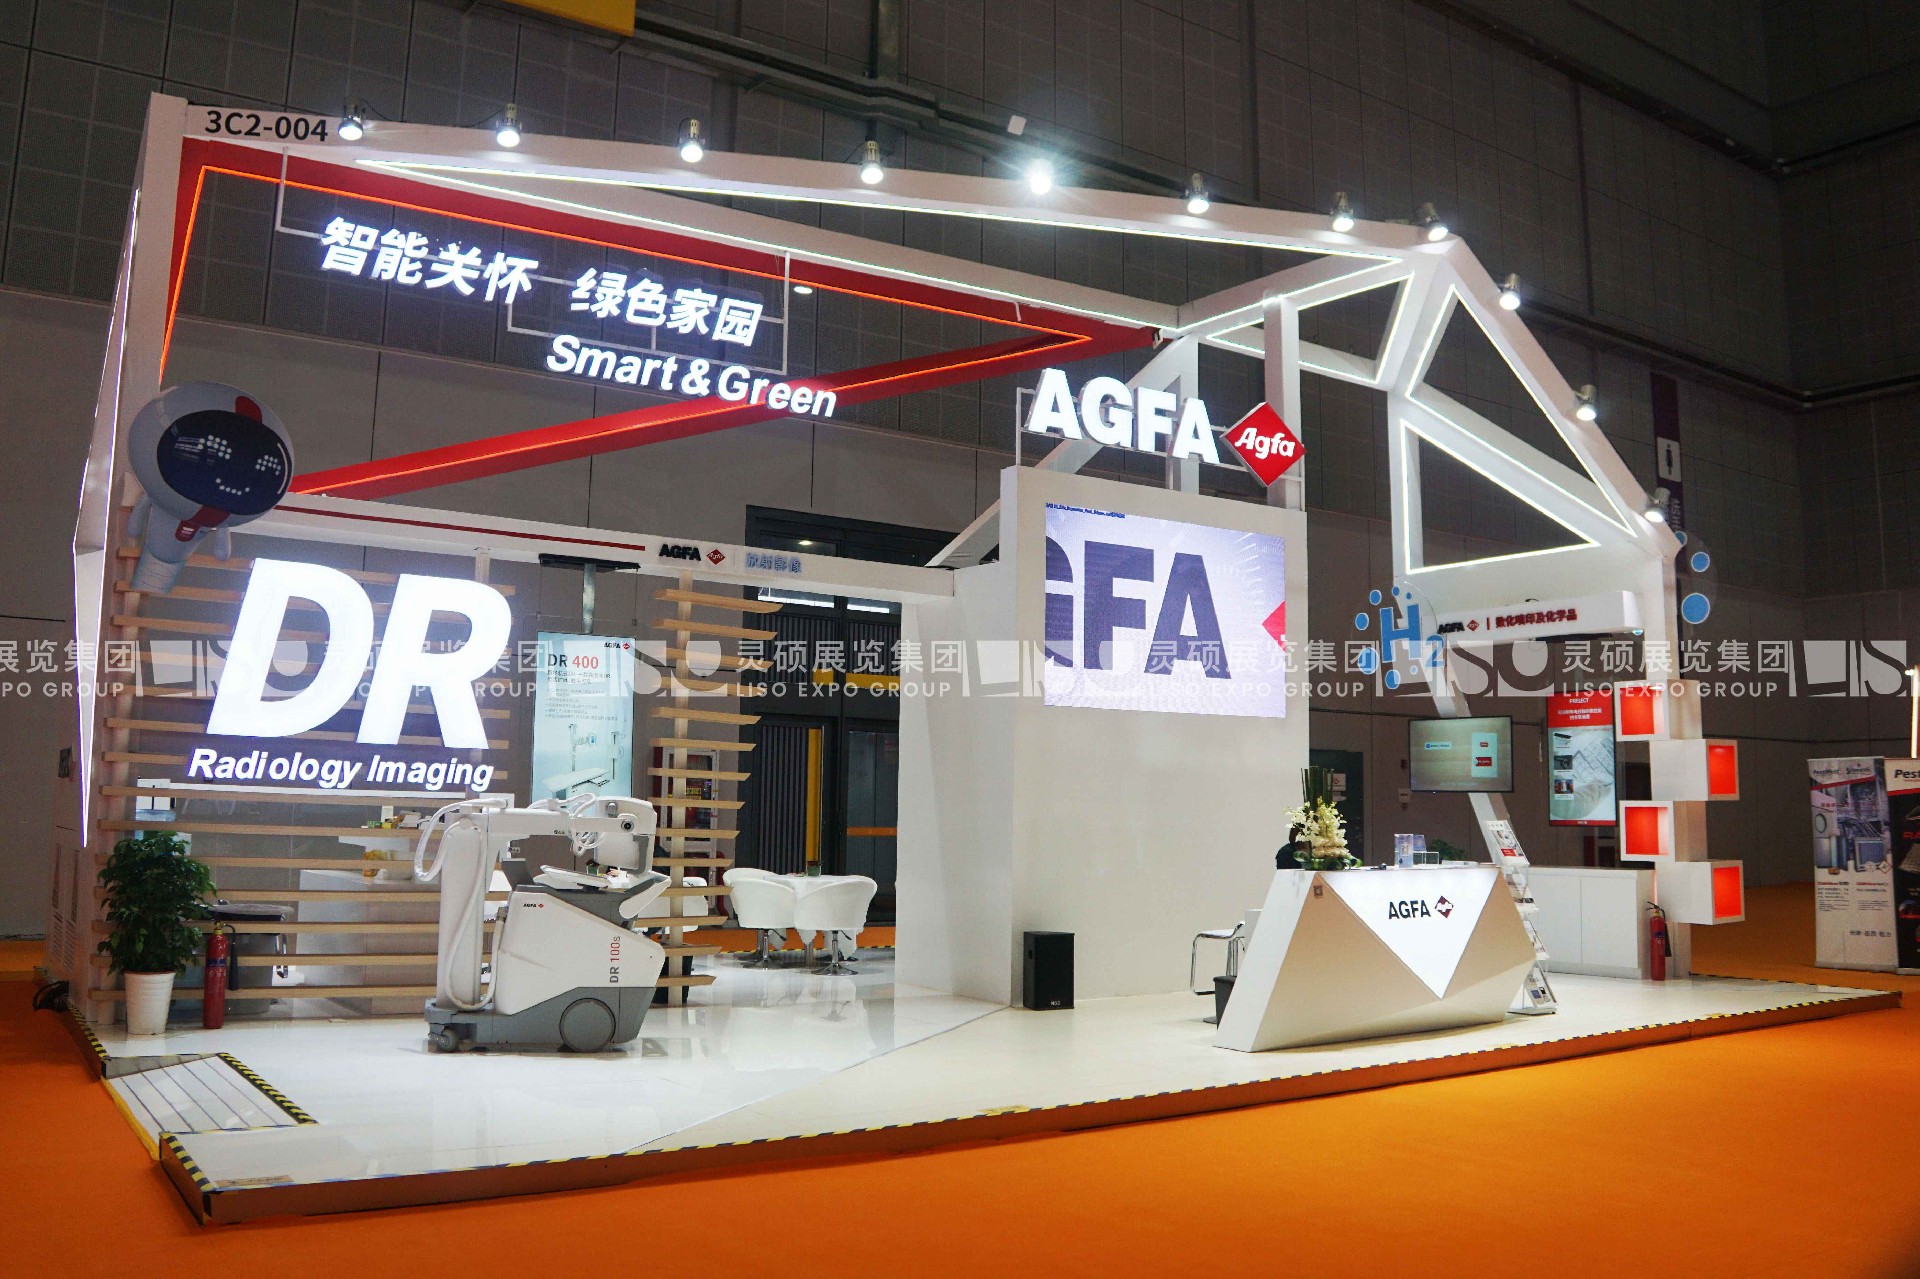 Agfa- CIIE Booth Design and Construction Case